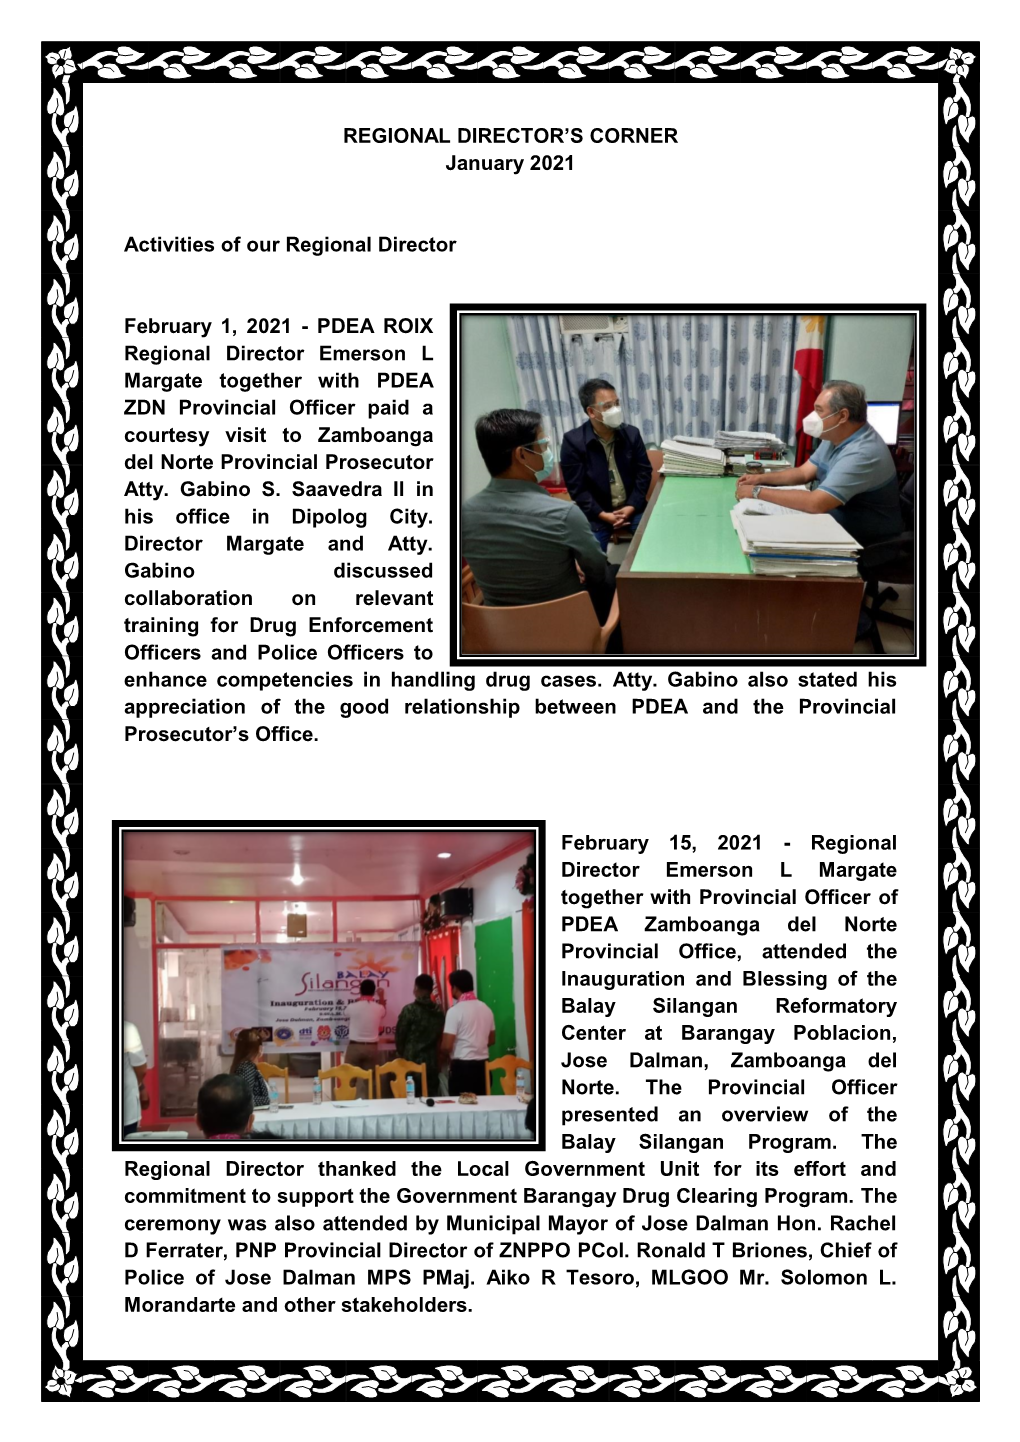 PDEA ROIX Regional Director Emerson L Margate Together with PDEA ZDN Provincial Officer Paid a Courtesy Visit to Zamboanga Del Norte Provincial Prosecutor Atty